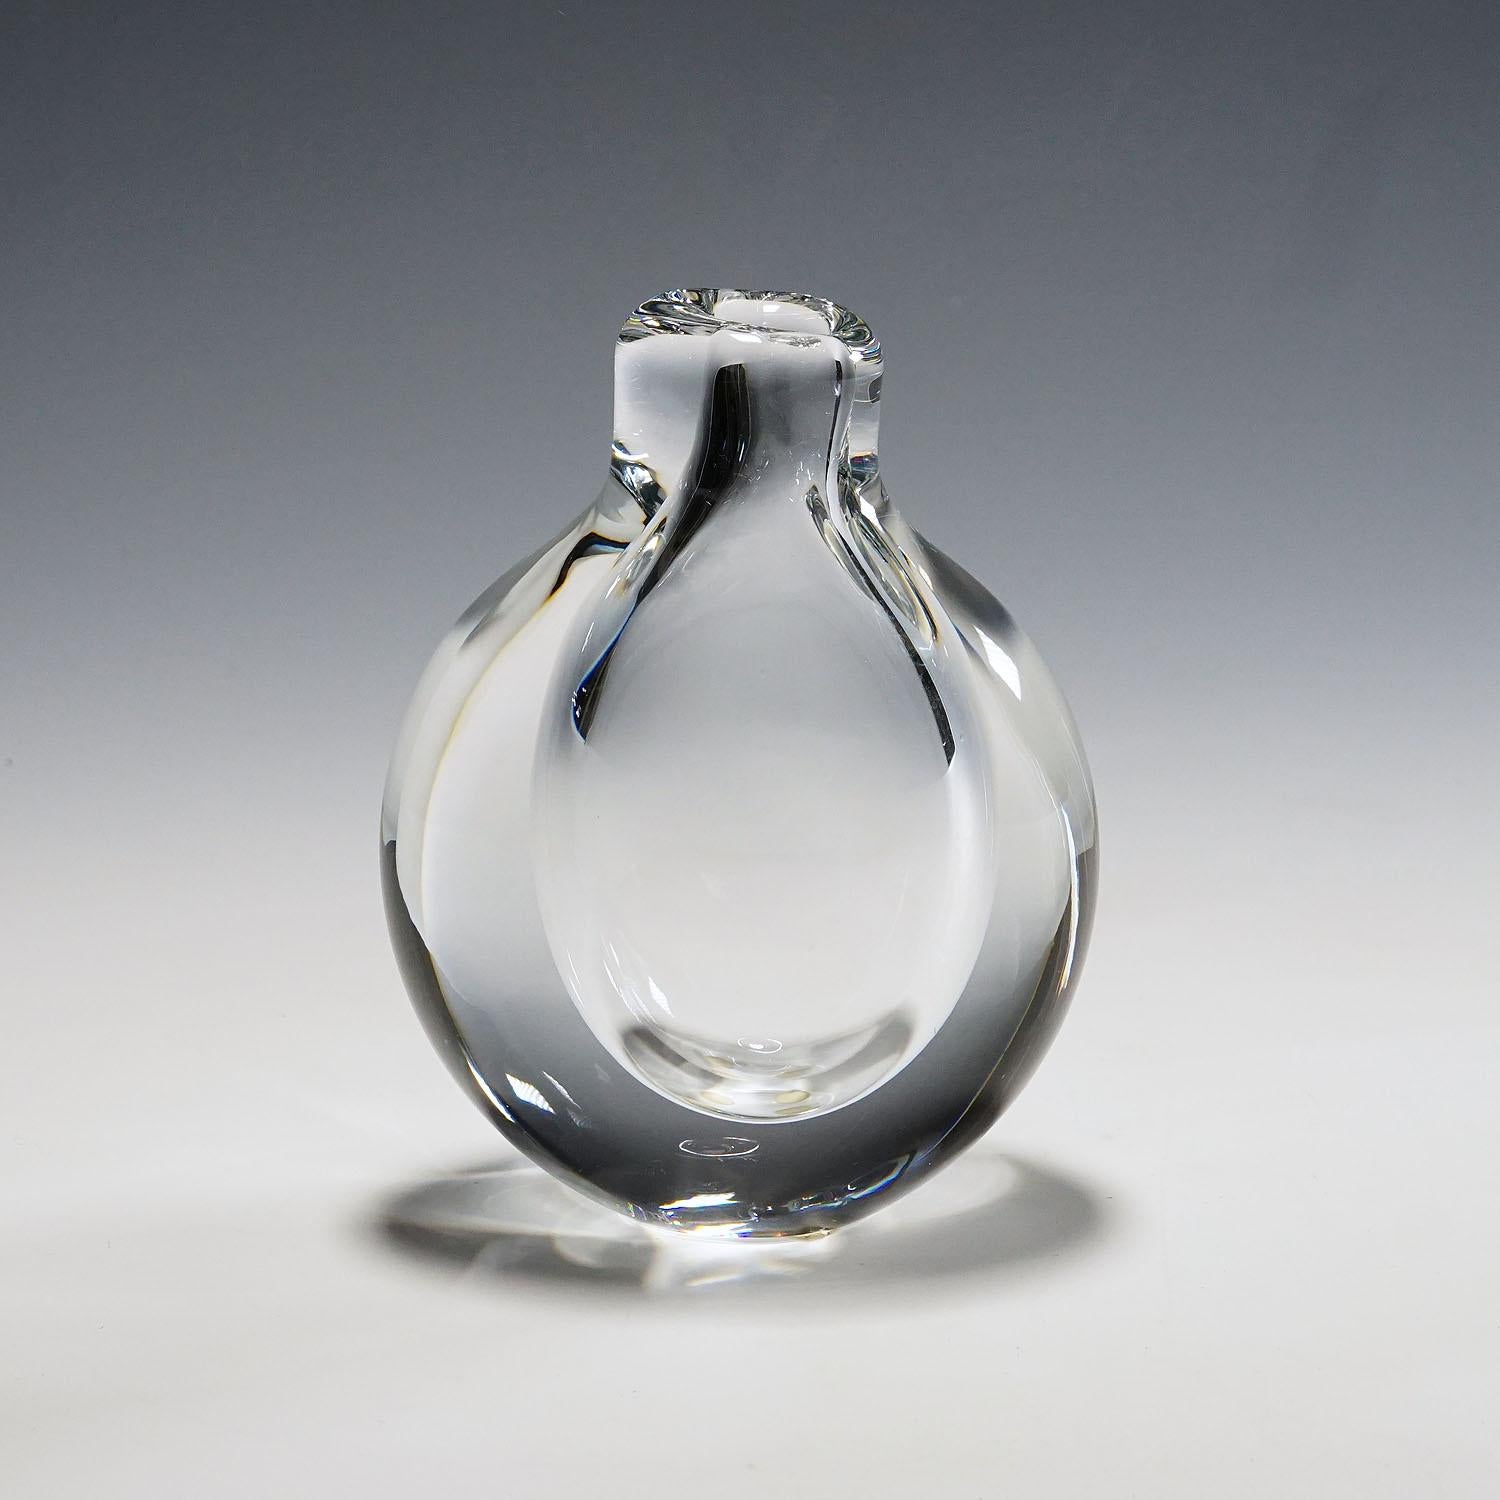 Raindrop vase by Göran Wärff for Kosta 1980s
Item e6581
A vintage art glass vase designed by Göran Wärff and manufactured by Kosta Glasbruk ca. 1980s. Made of thick handblown lead crystal glass. The vase is signed with 